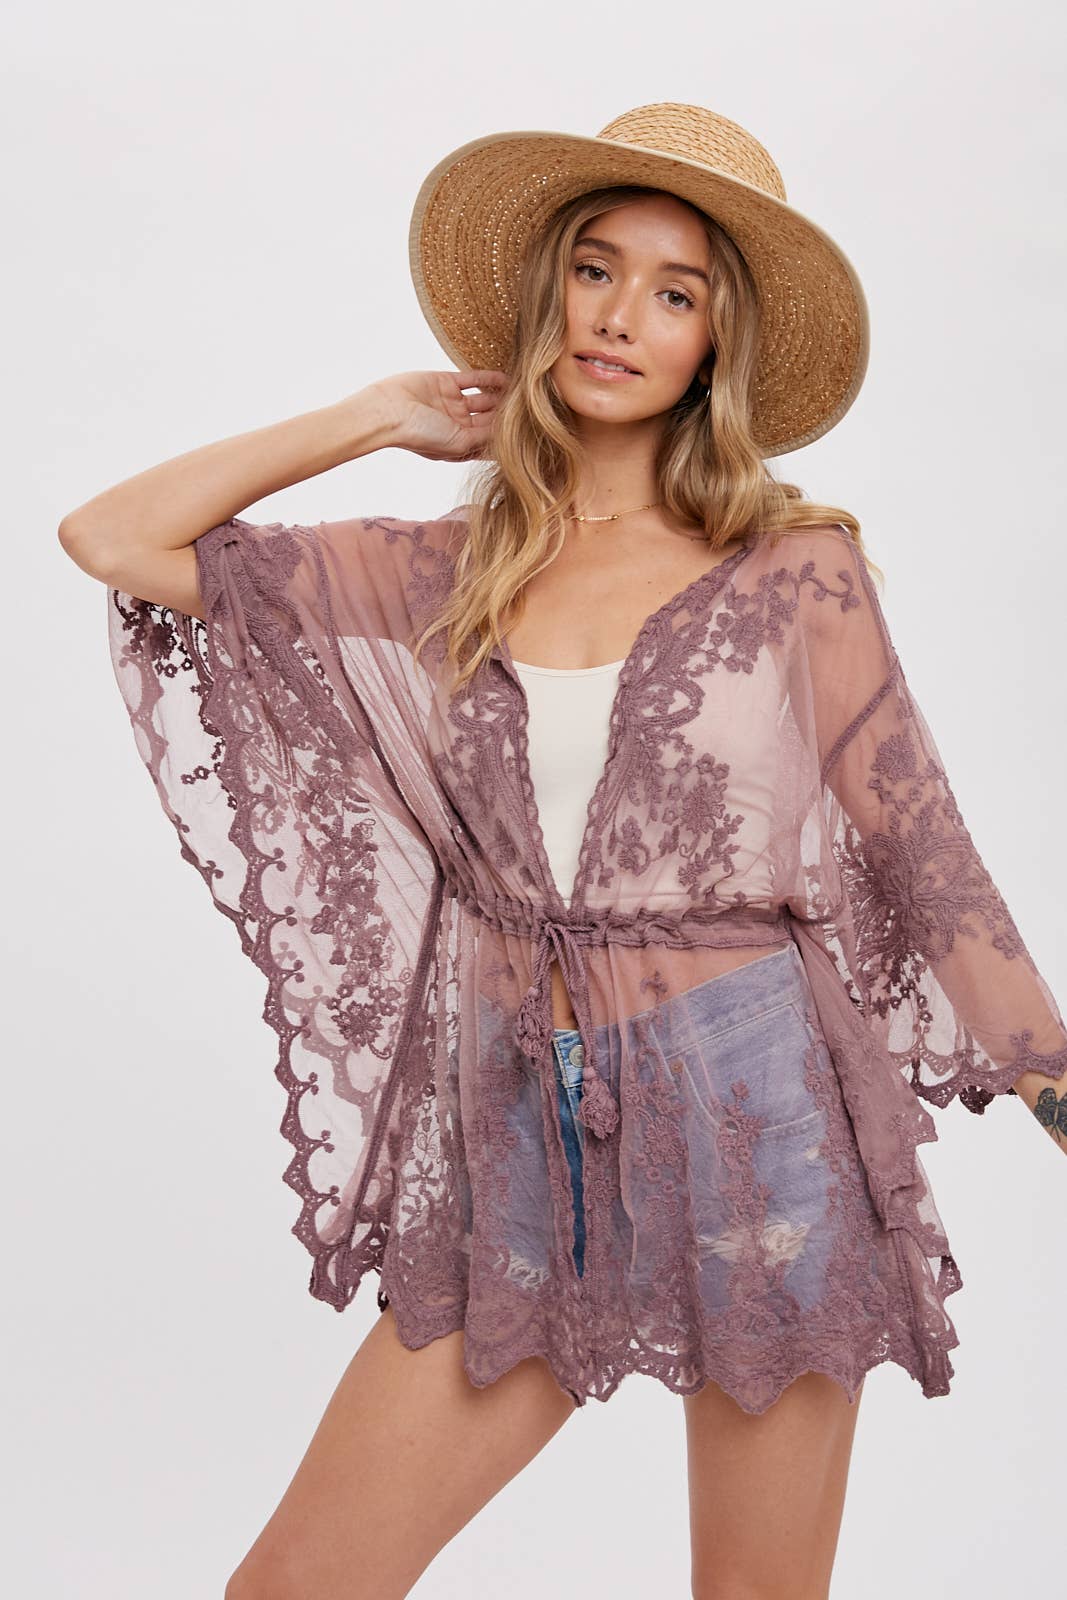 Short Embroidered Kimono: Open-front design, 3/4 wide bell sleeves, scalloped hemline, and waist tie string with tassel. Versatile and stylish for layering, pairing with a maxi dress, or as a beach cover-up. Elevate your style with this chic and comfortable kimono.